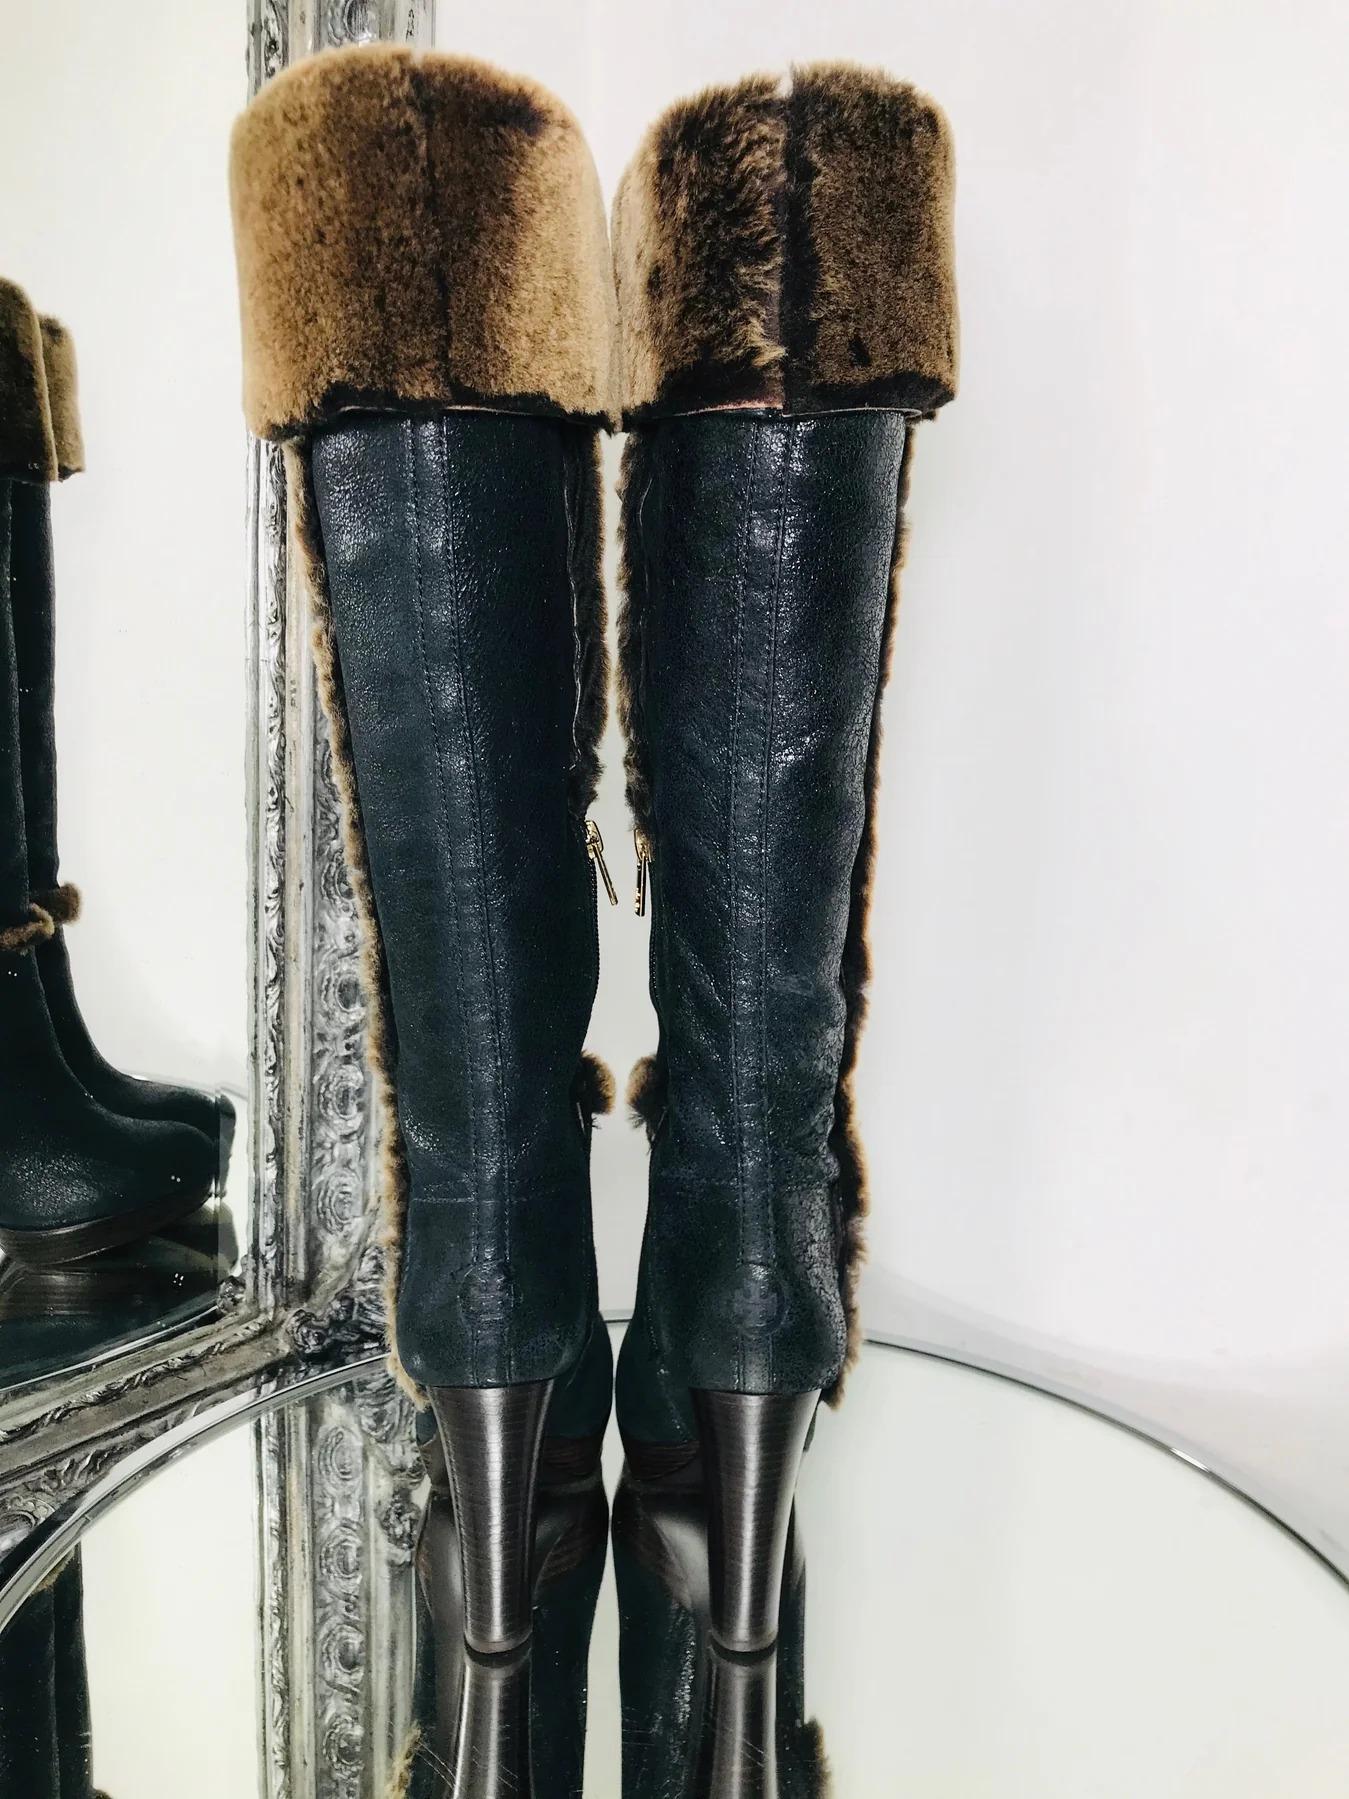 Tory Burch Leather & Shearling Boots In Excellent Condition For Sale In London, GB